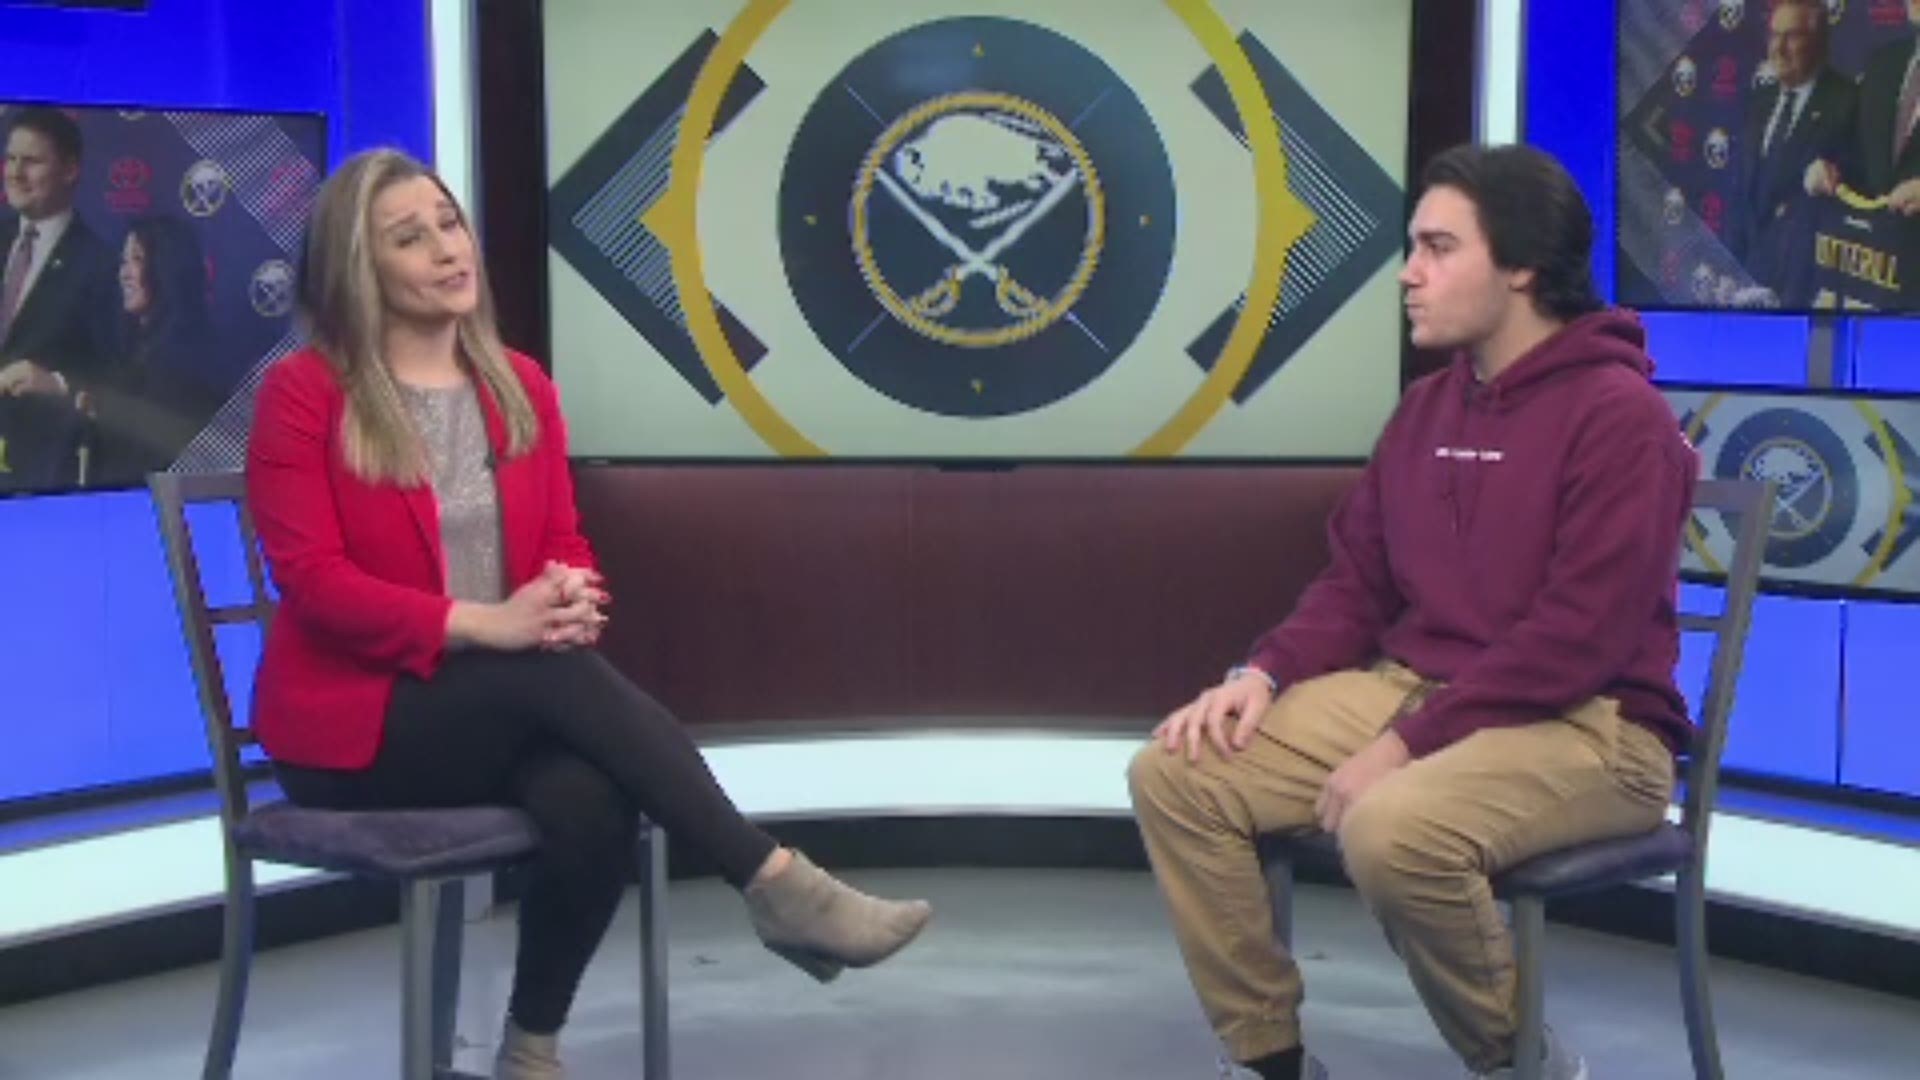 2 on Your Side's Heather Prusak sat down with Peter Tripi, who organized the protest rally happening on Saturday morning outside of the arena.